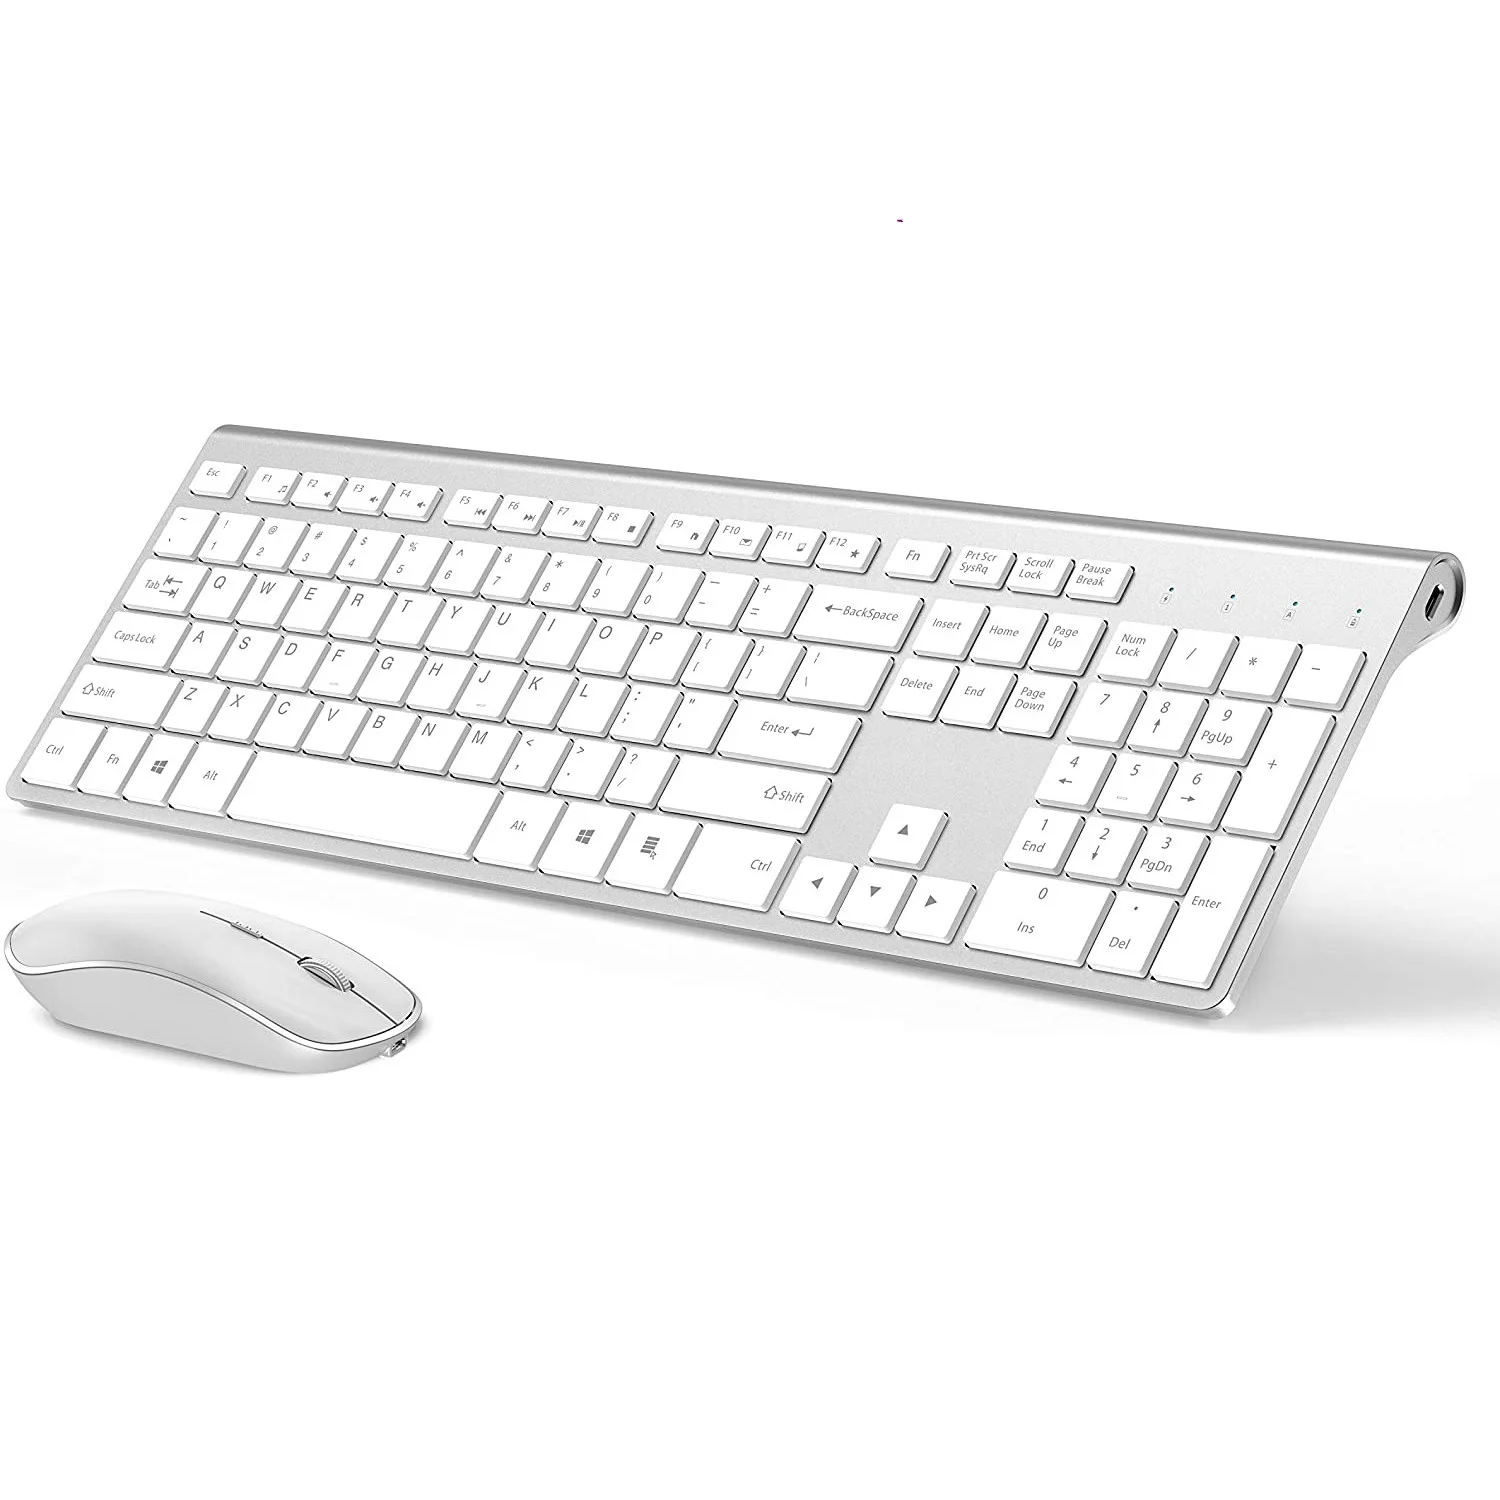 2.4G Rechargeable Wireless Keyboard And Mouse Ergonomic Full-Size Design Russian/English/German/French Laptop/PC/ Windows，Silver